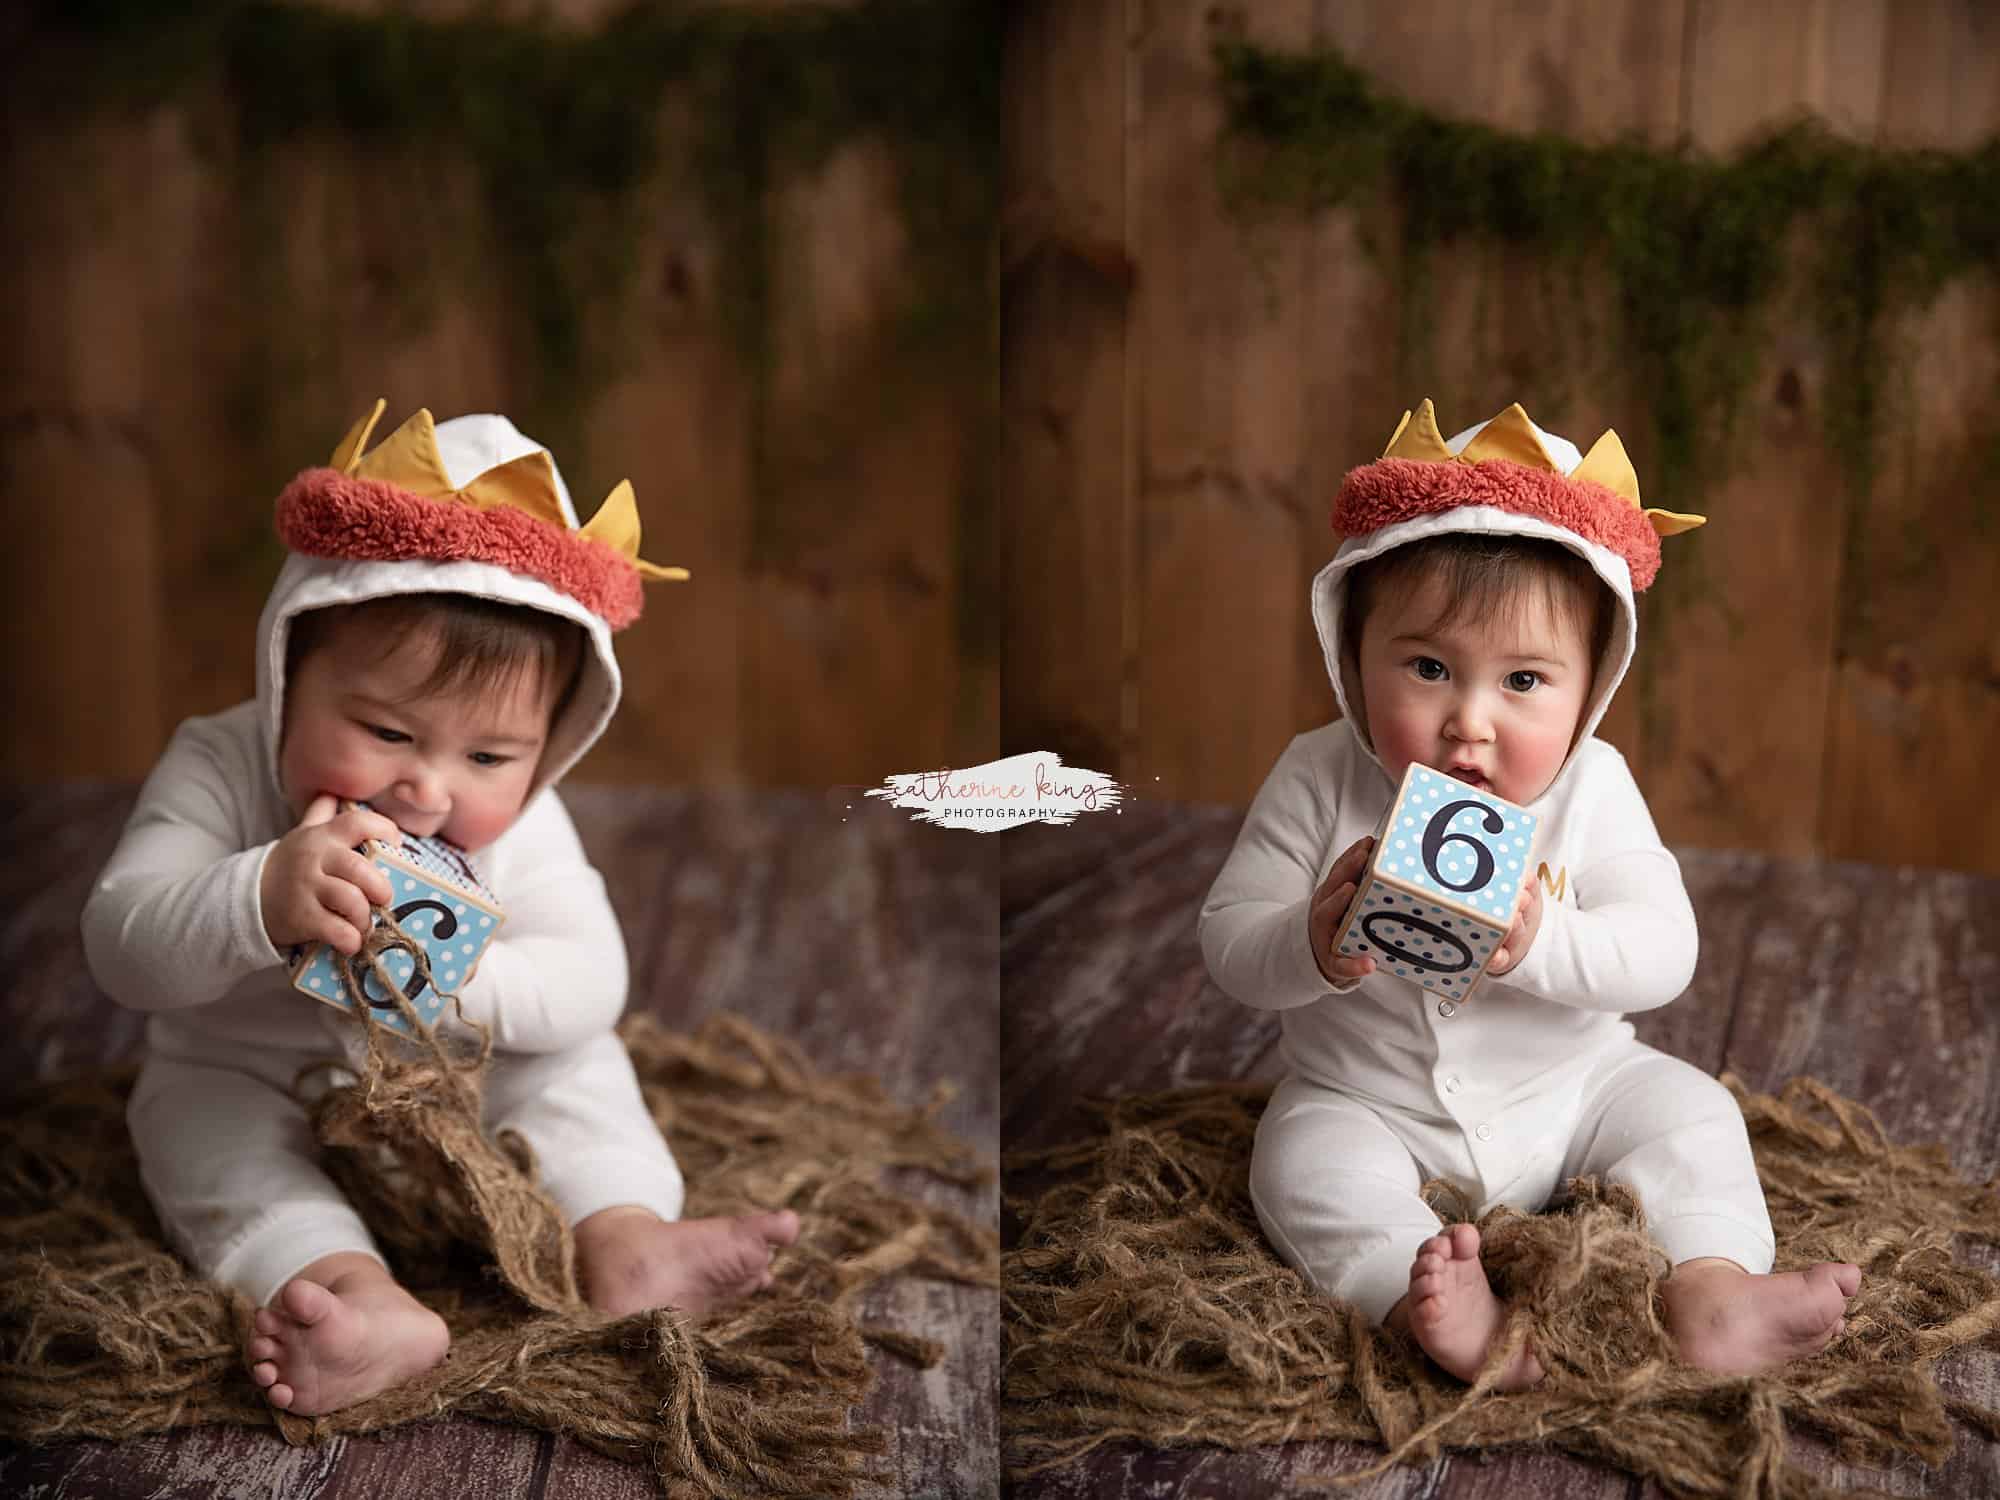 capturing your baby's milestone; 6 month baby milestone photography with Austin